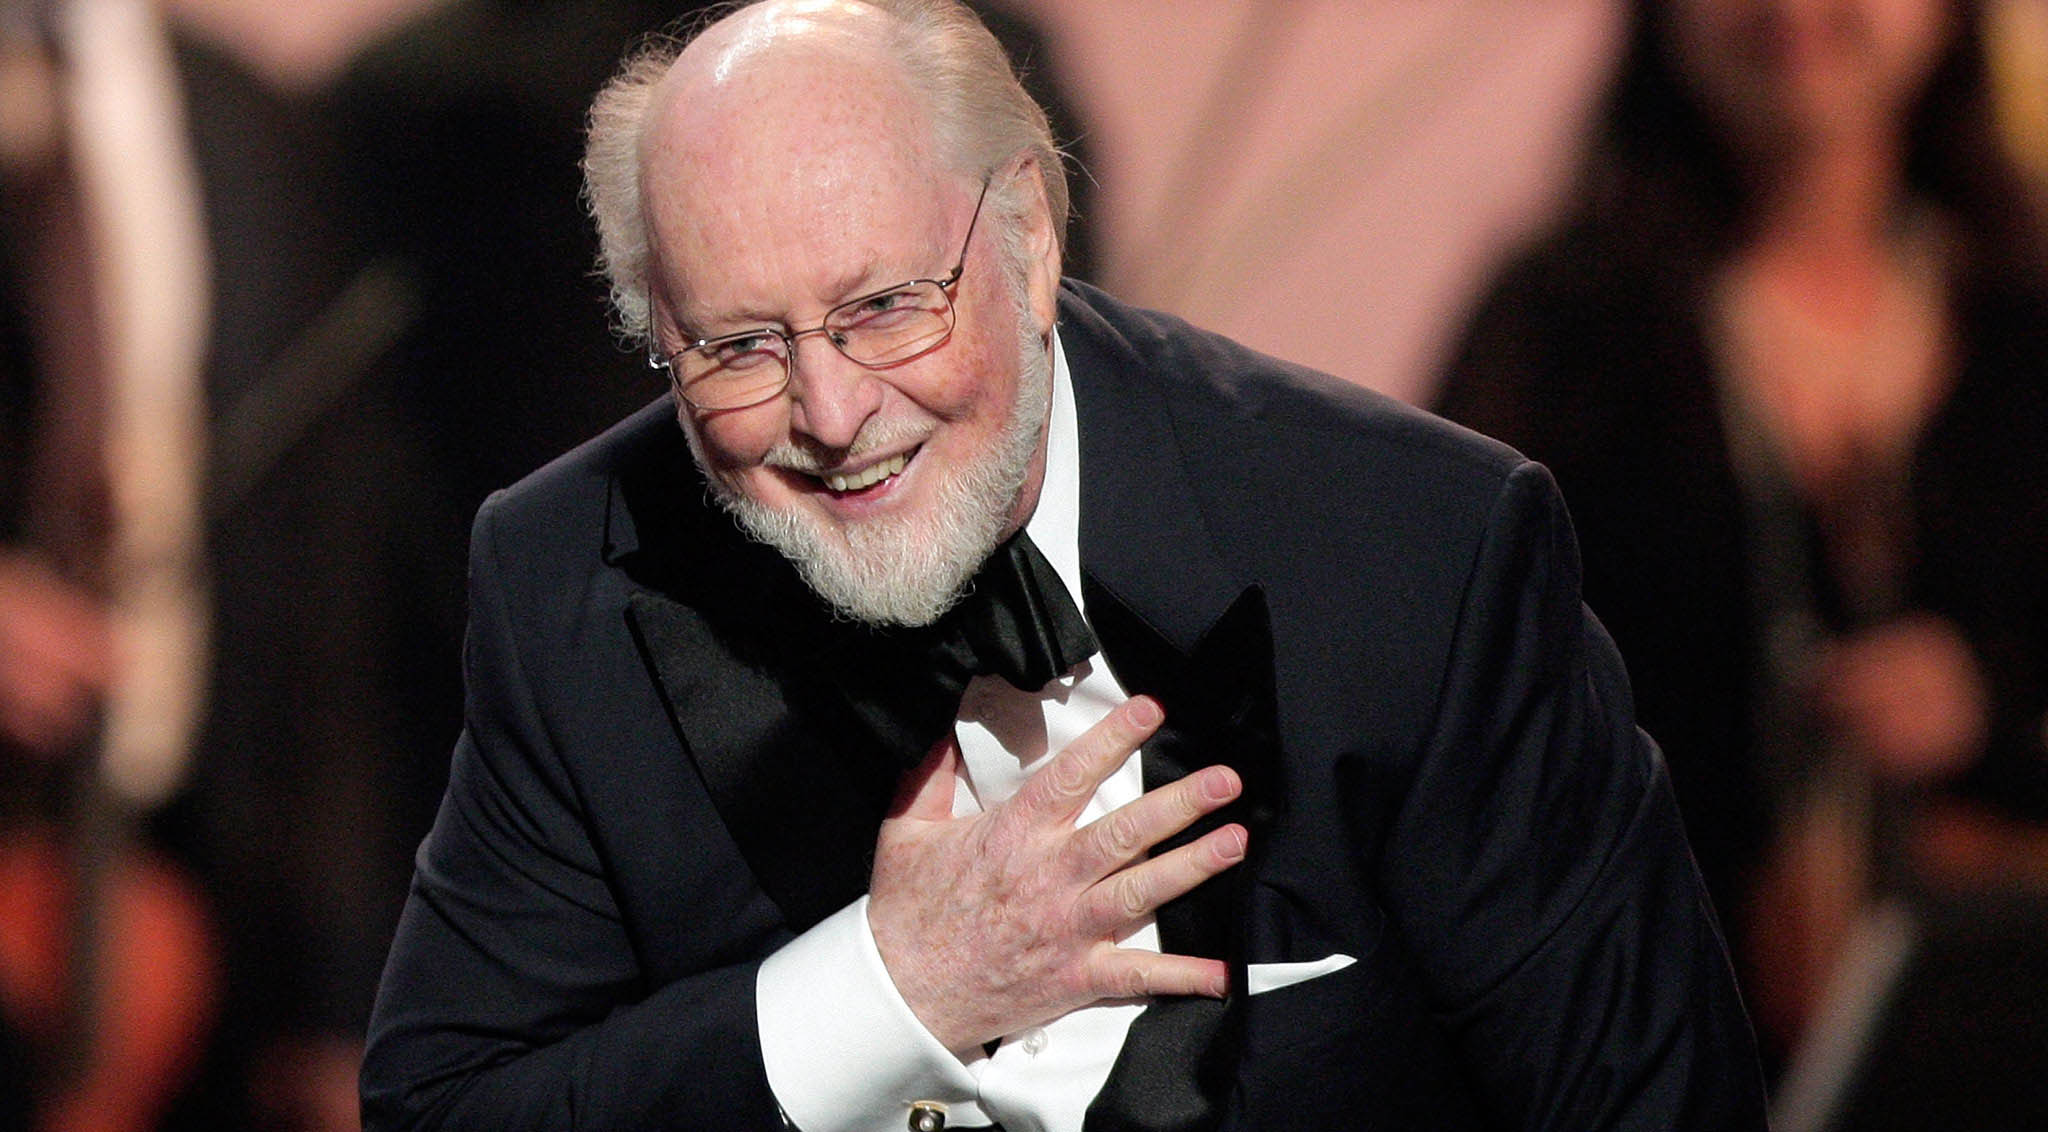 Composer John Williams has received an astonishing 51 Oscar nominations. Here are ten of his most essential cues we’ll never get tired of listening to.